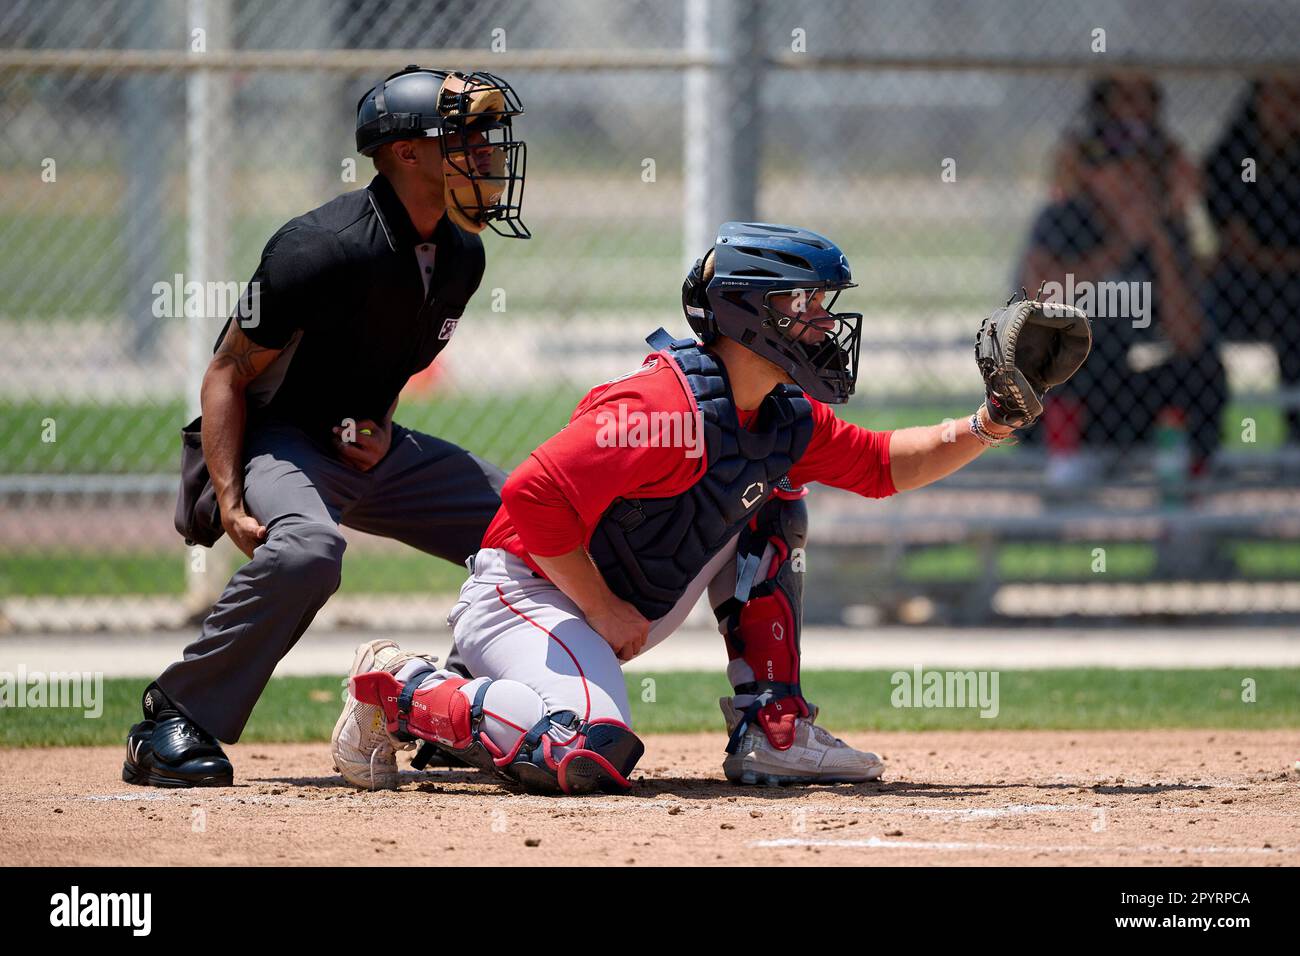 Umpire Sam Glickman and Boston Red Sox catcher Brooks Brannon (17) await  the pitch during an Extended Spring Training baseball game against the  Minnesota Twins on May 4, 2023 at Century Link